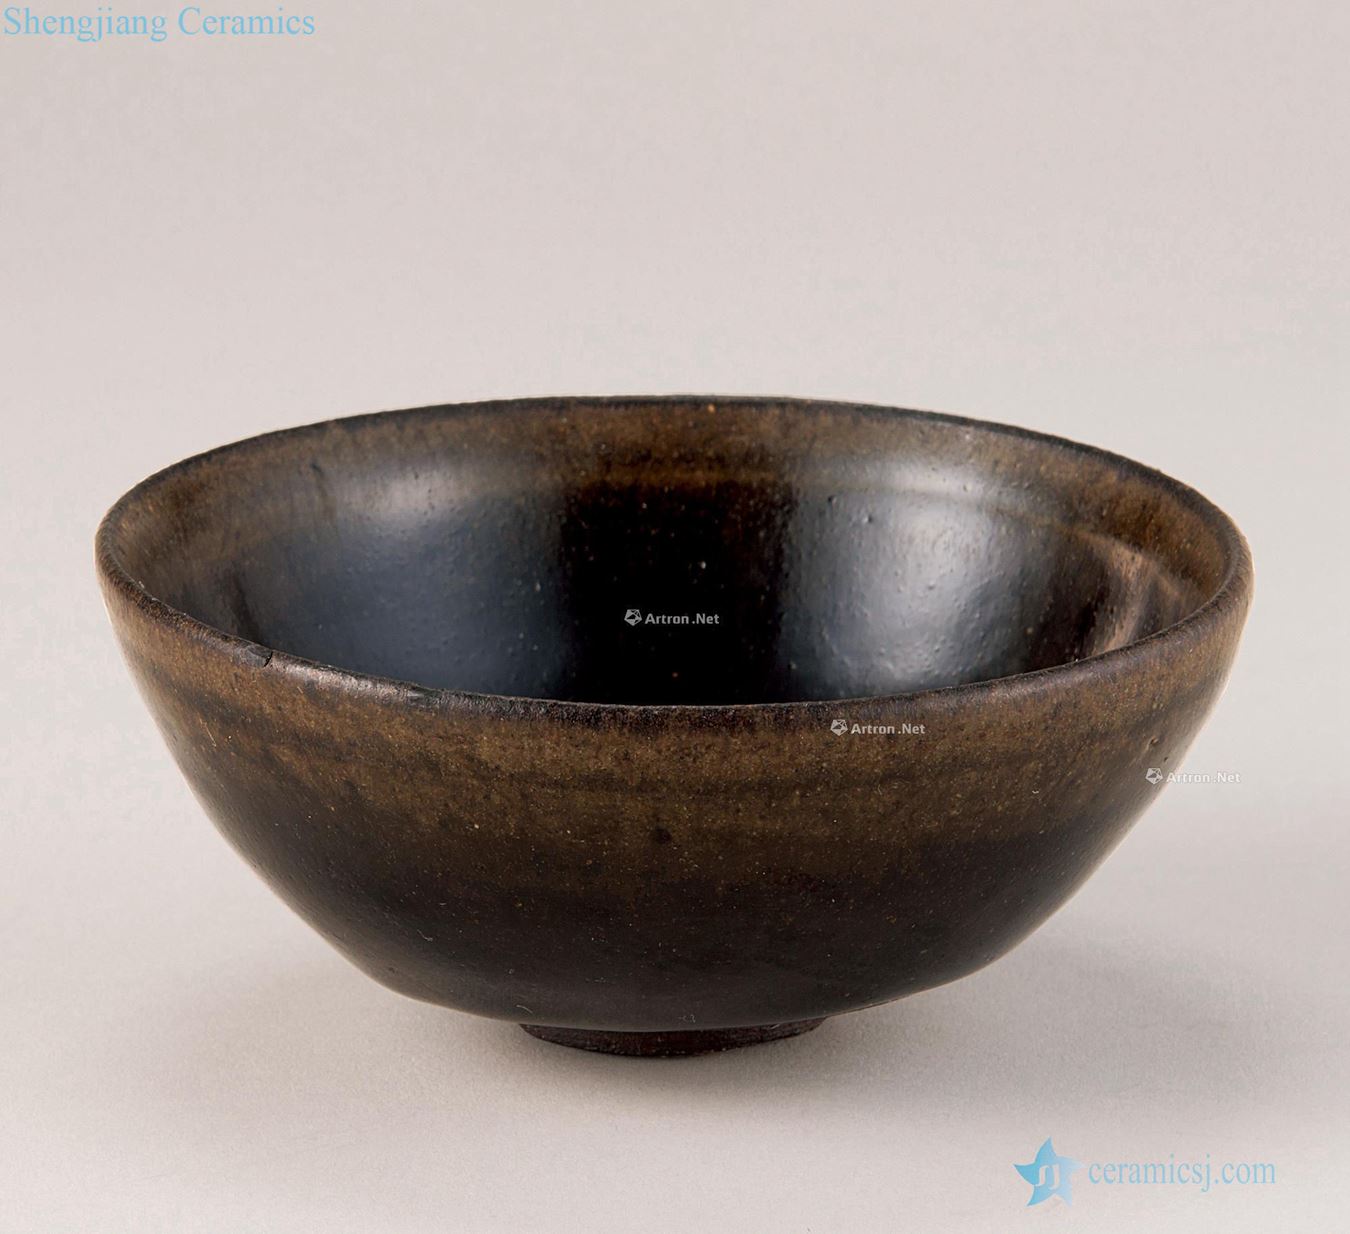 The song dynasty To build kilns huaping sharply glaze teacup